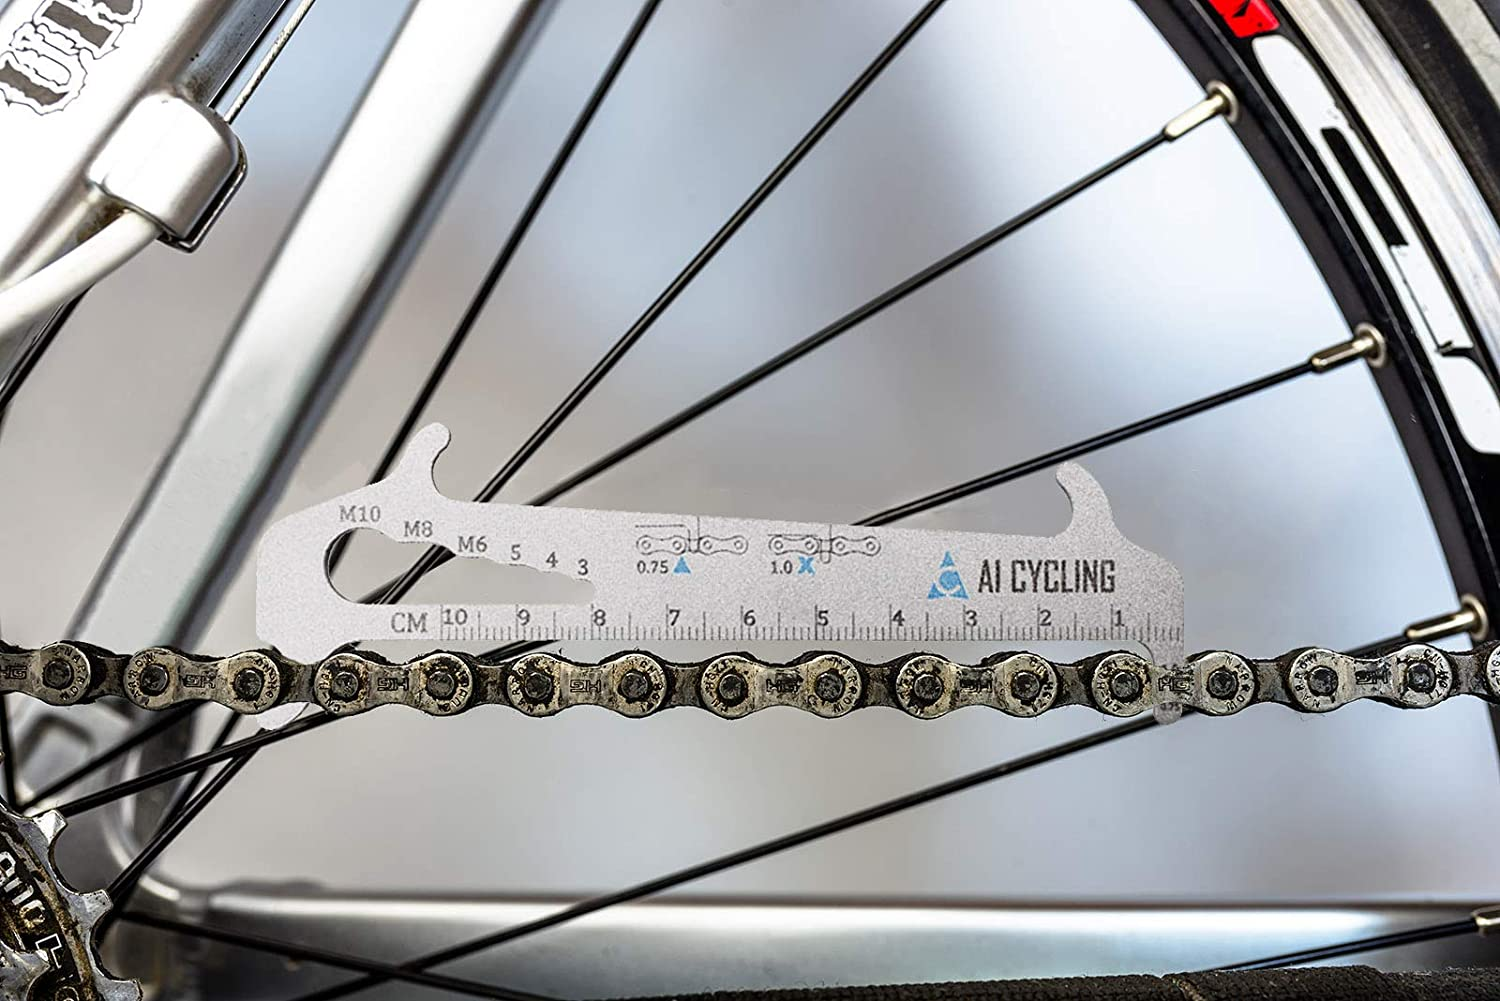 This bicycle chain indicator is a much-needed mountain bike maintenance tool to help you keep track of the wear and tear of your mountain bike chain.